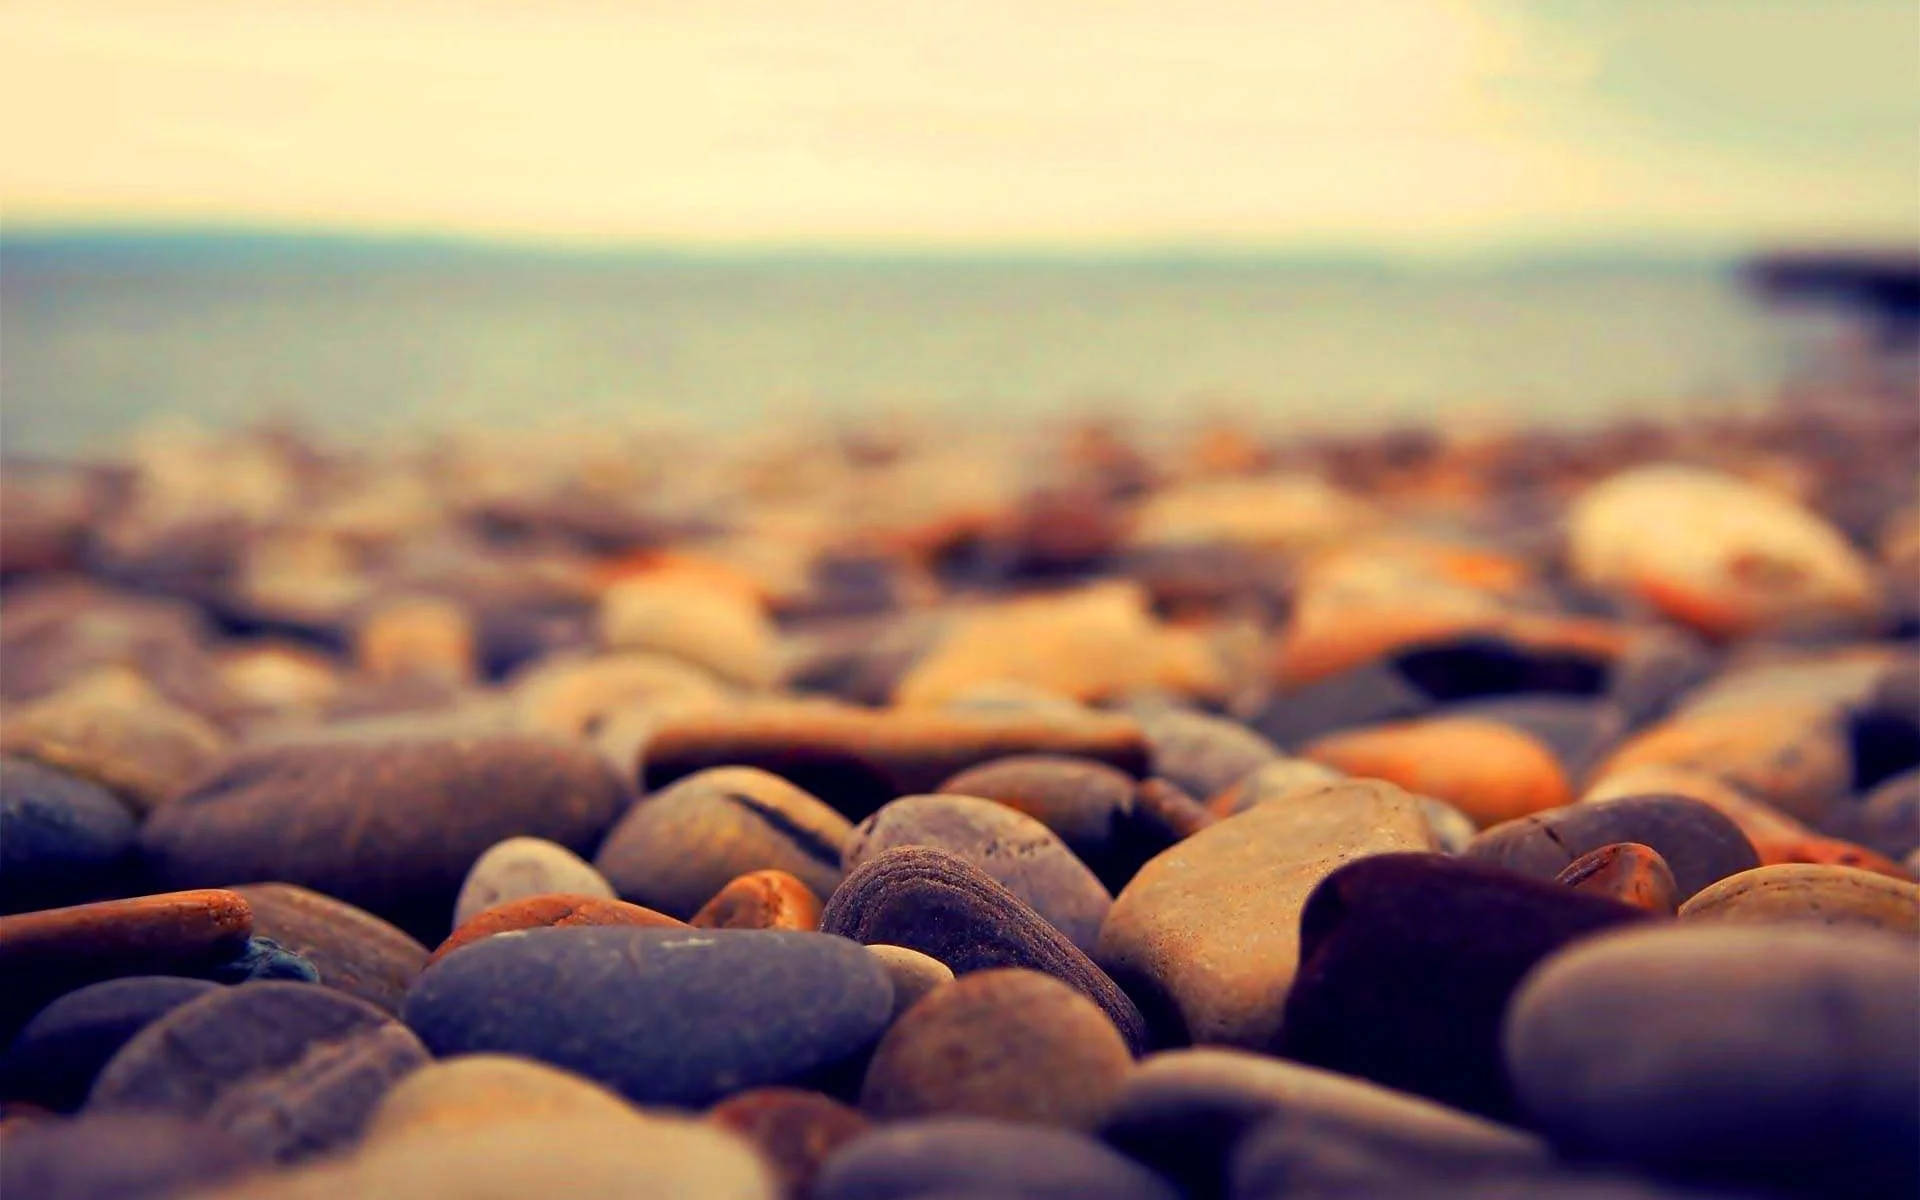 Hd Photography Of Rocks By The Beach